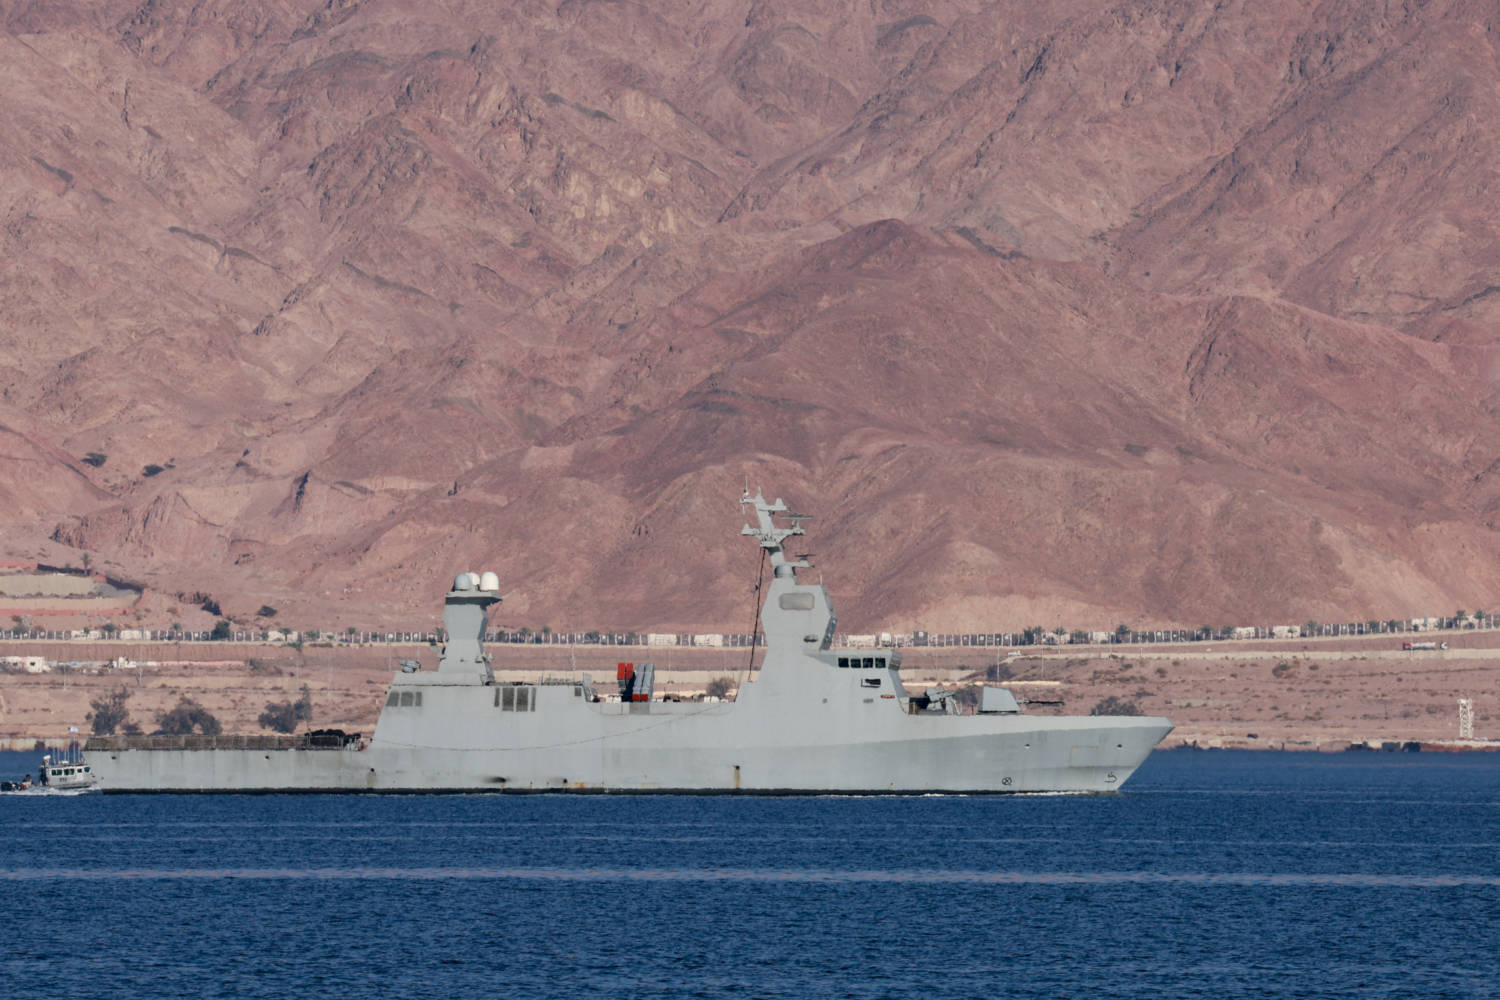 An Iron Dome Anti Missile Battery Is Seen On An Israeli Military Ship Off The Shore Of The City Of Eilat